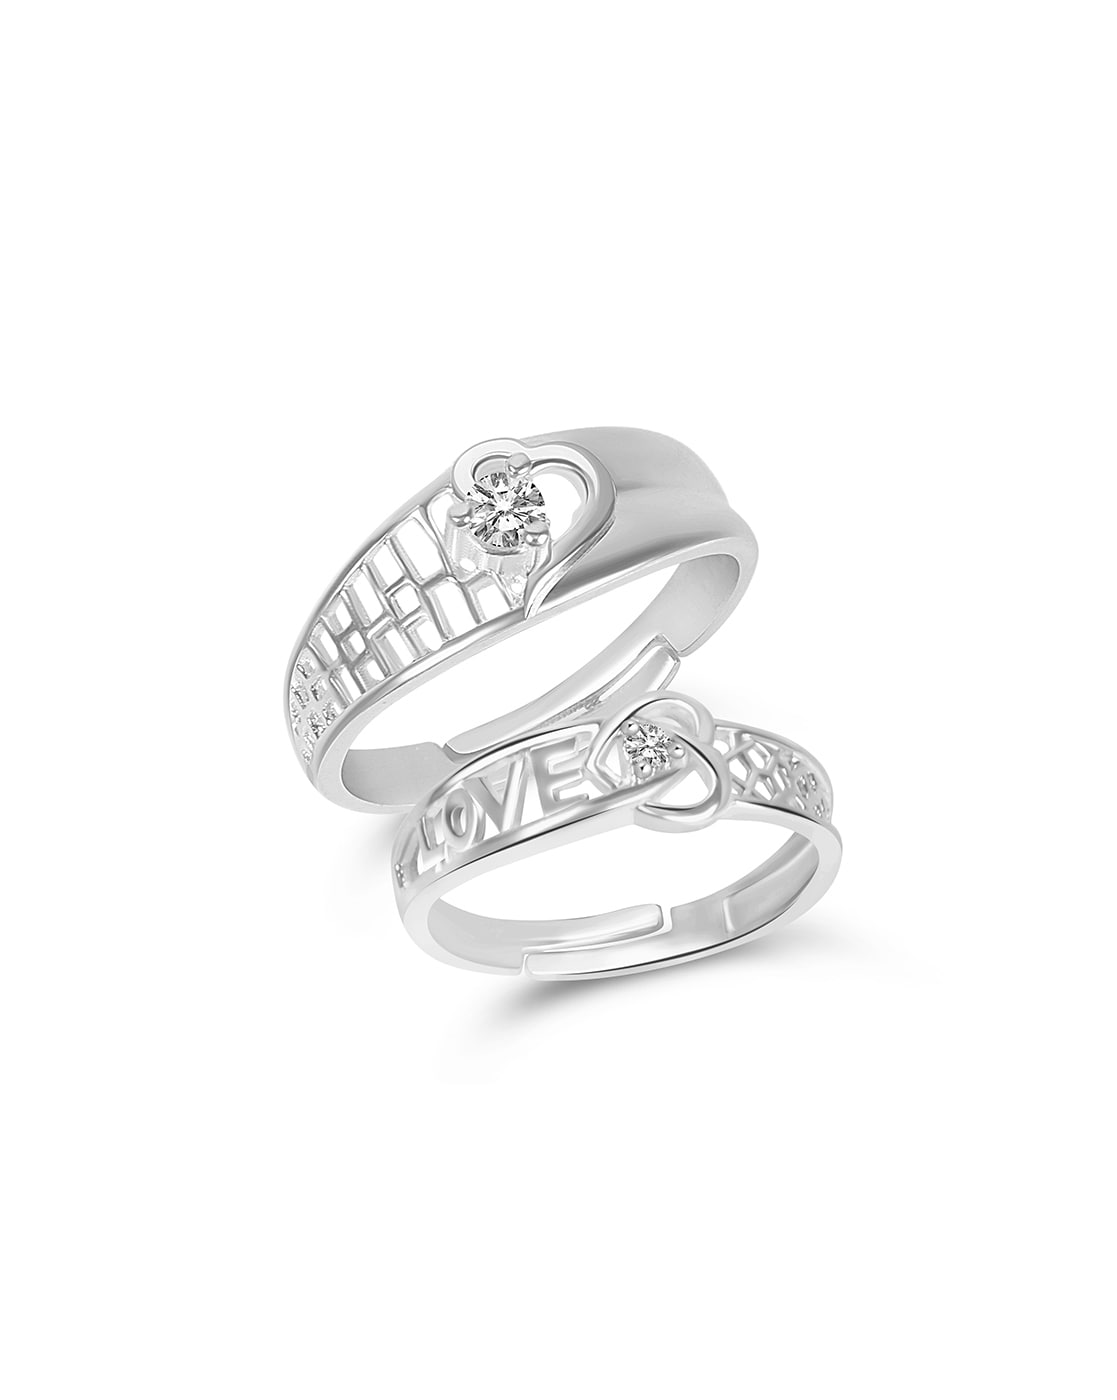 Couple Ring Crown King Queen American diamond Valentine Gifts Adjustable  Love Stylish Combo Couple Silver Heart